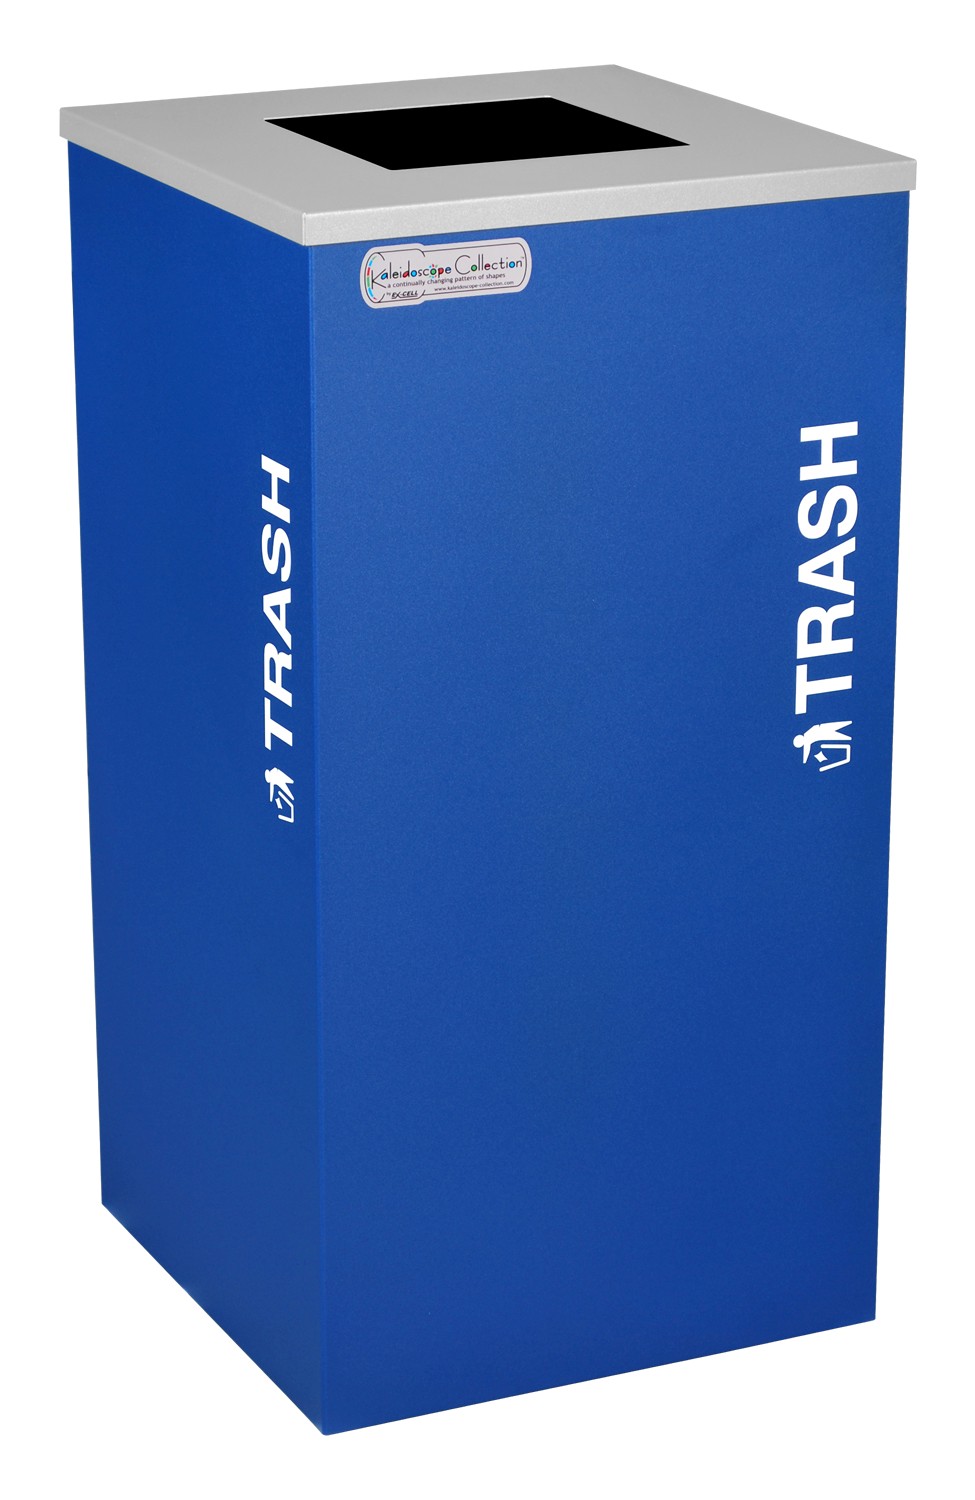 Picture of Ex-Cell Kaiser RC-KDSQ-T RYX 18-gal recycling recptacle- square top and Trash decal- Royal Blue Texture finish